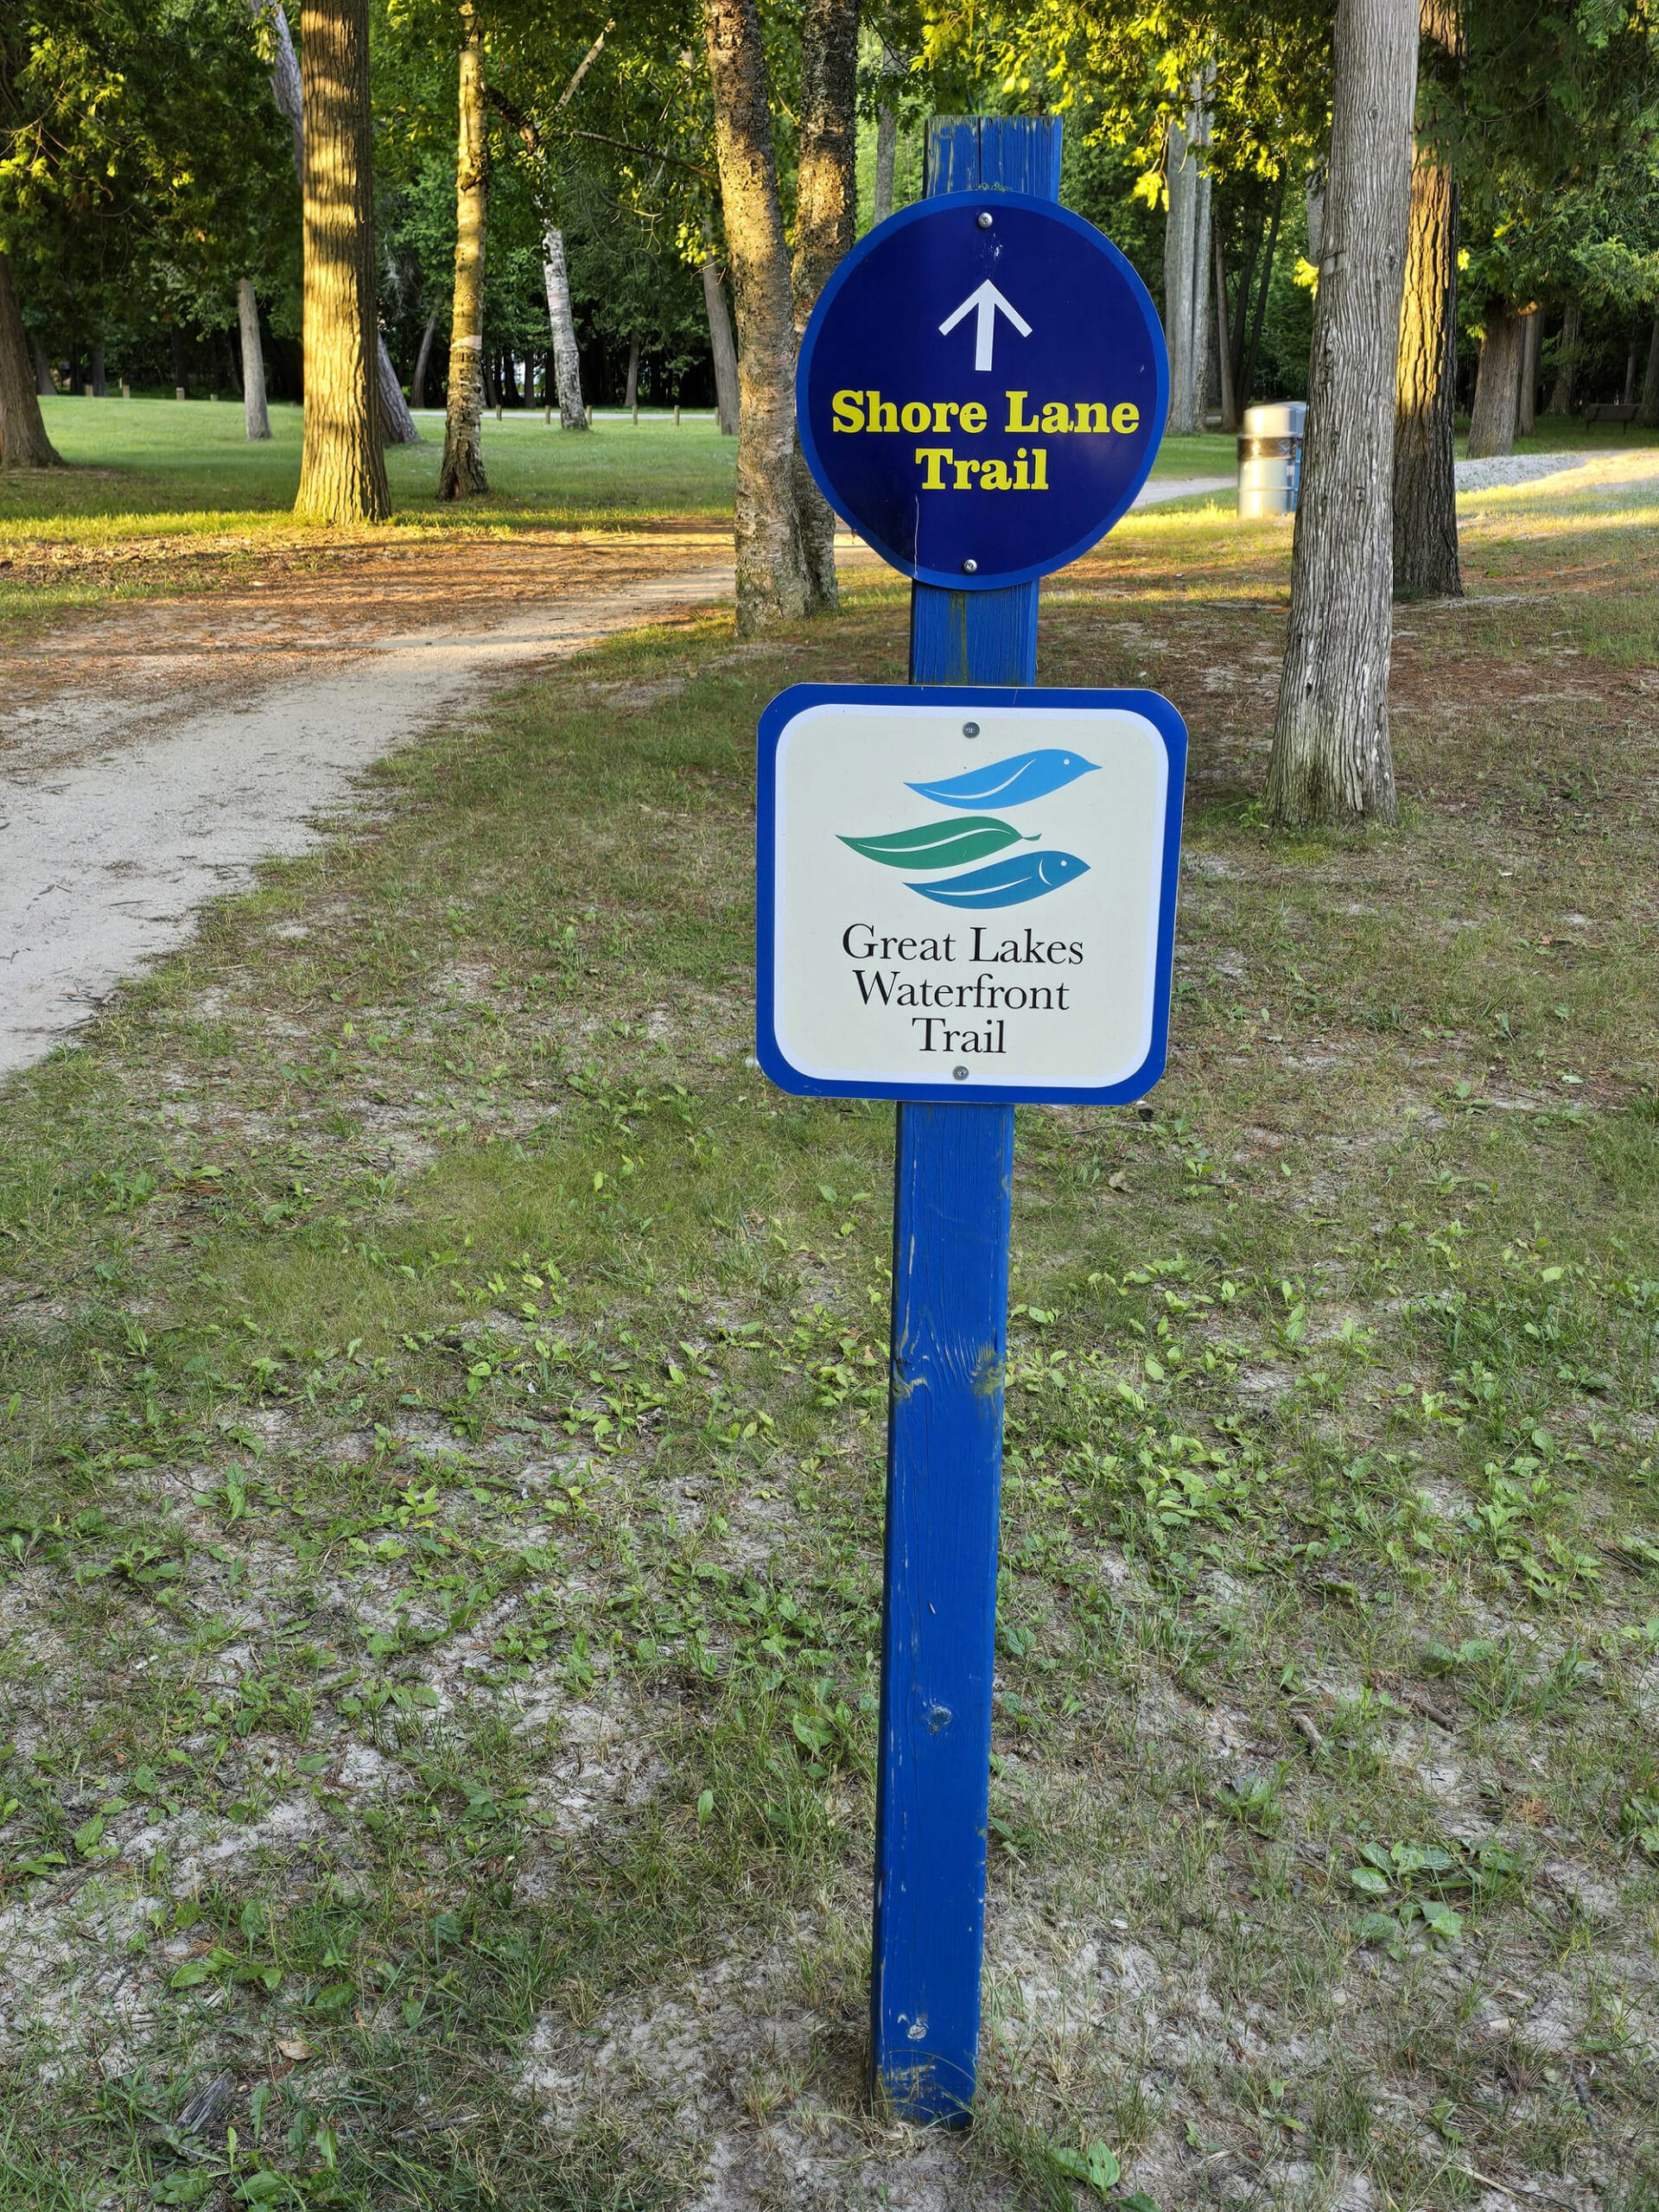 A bike trail with a sign saying Shore Lane Trail, Great Lakes Waterfront Trail.